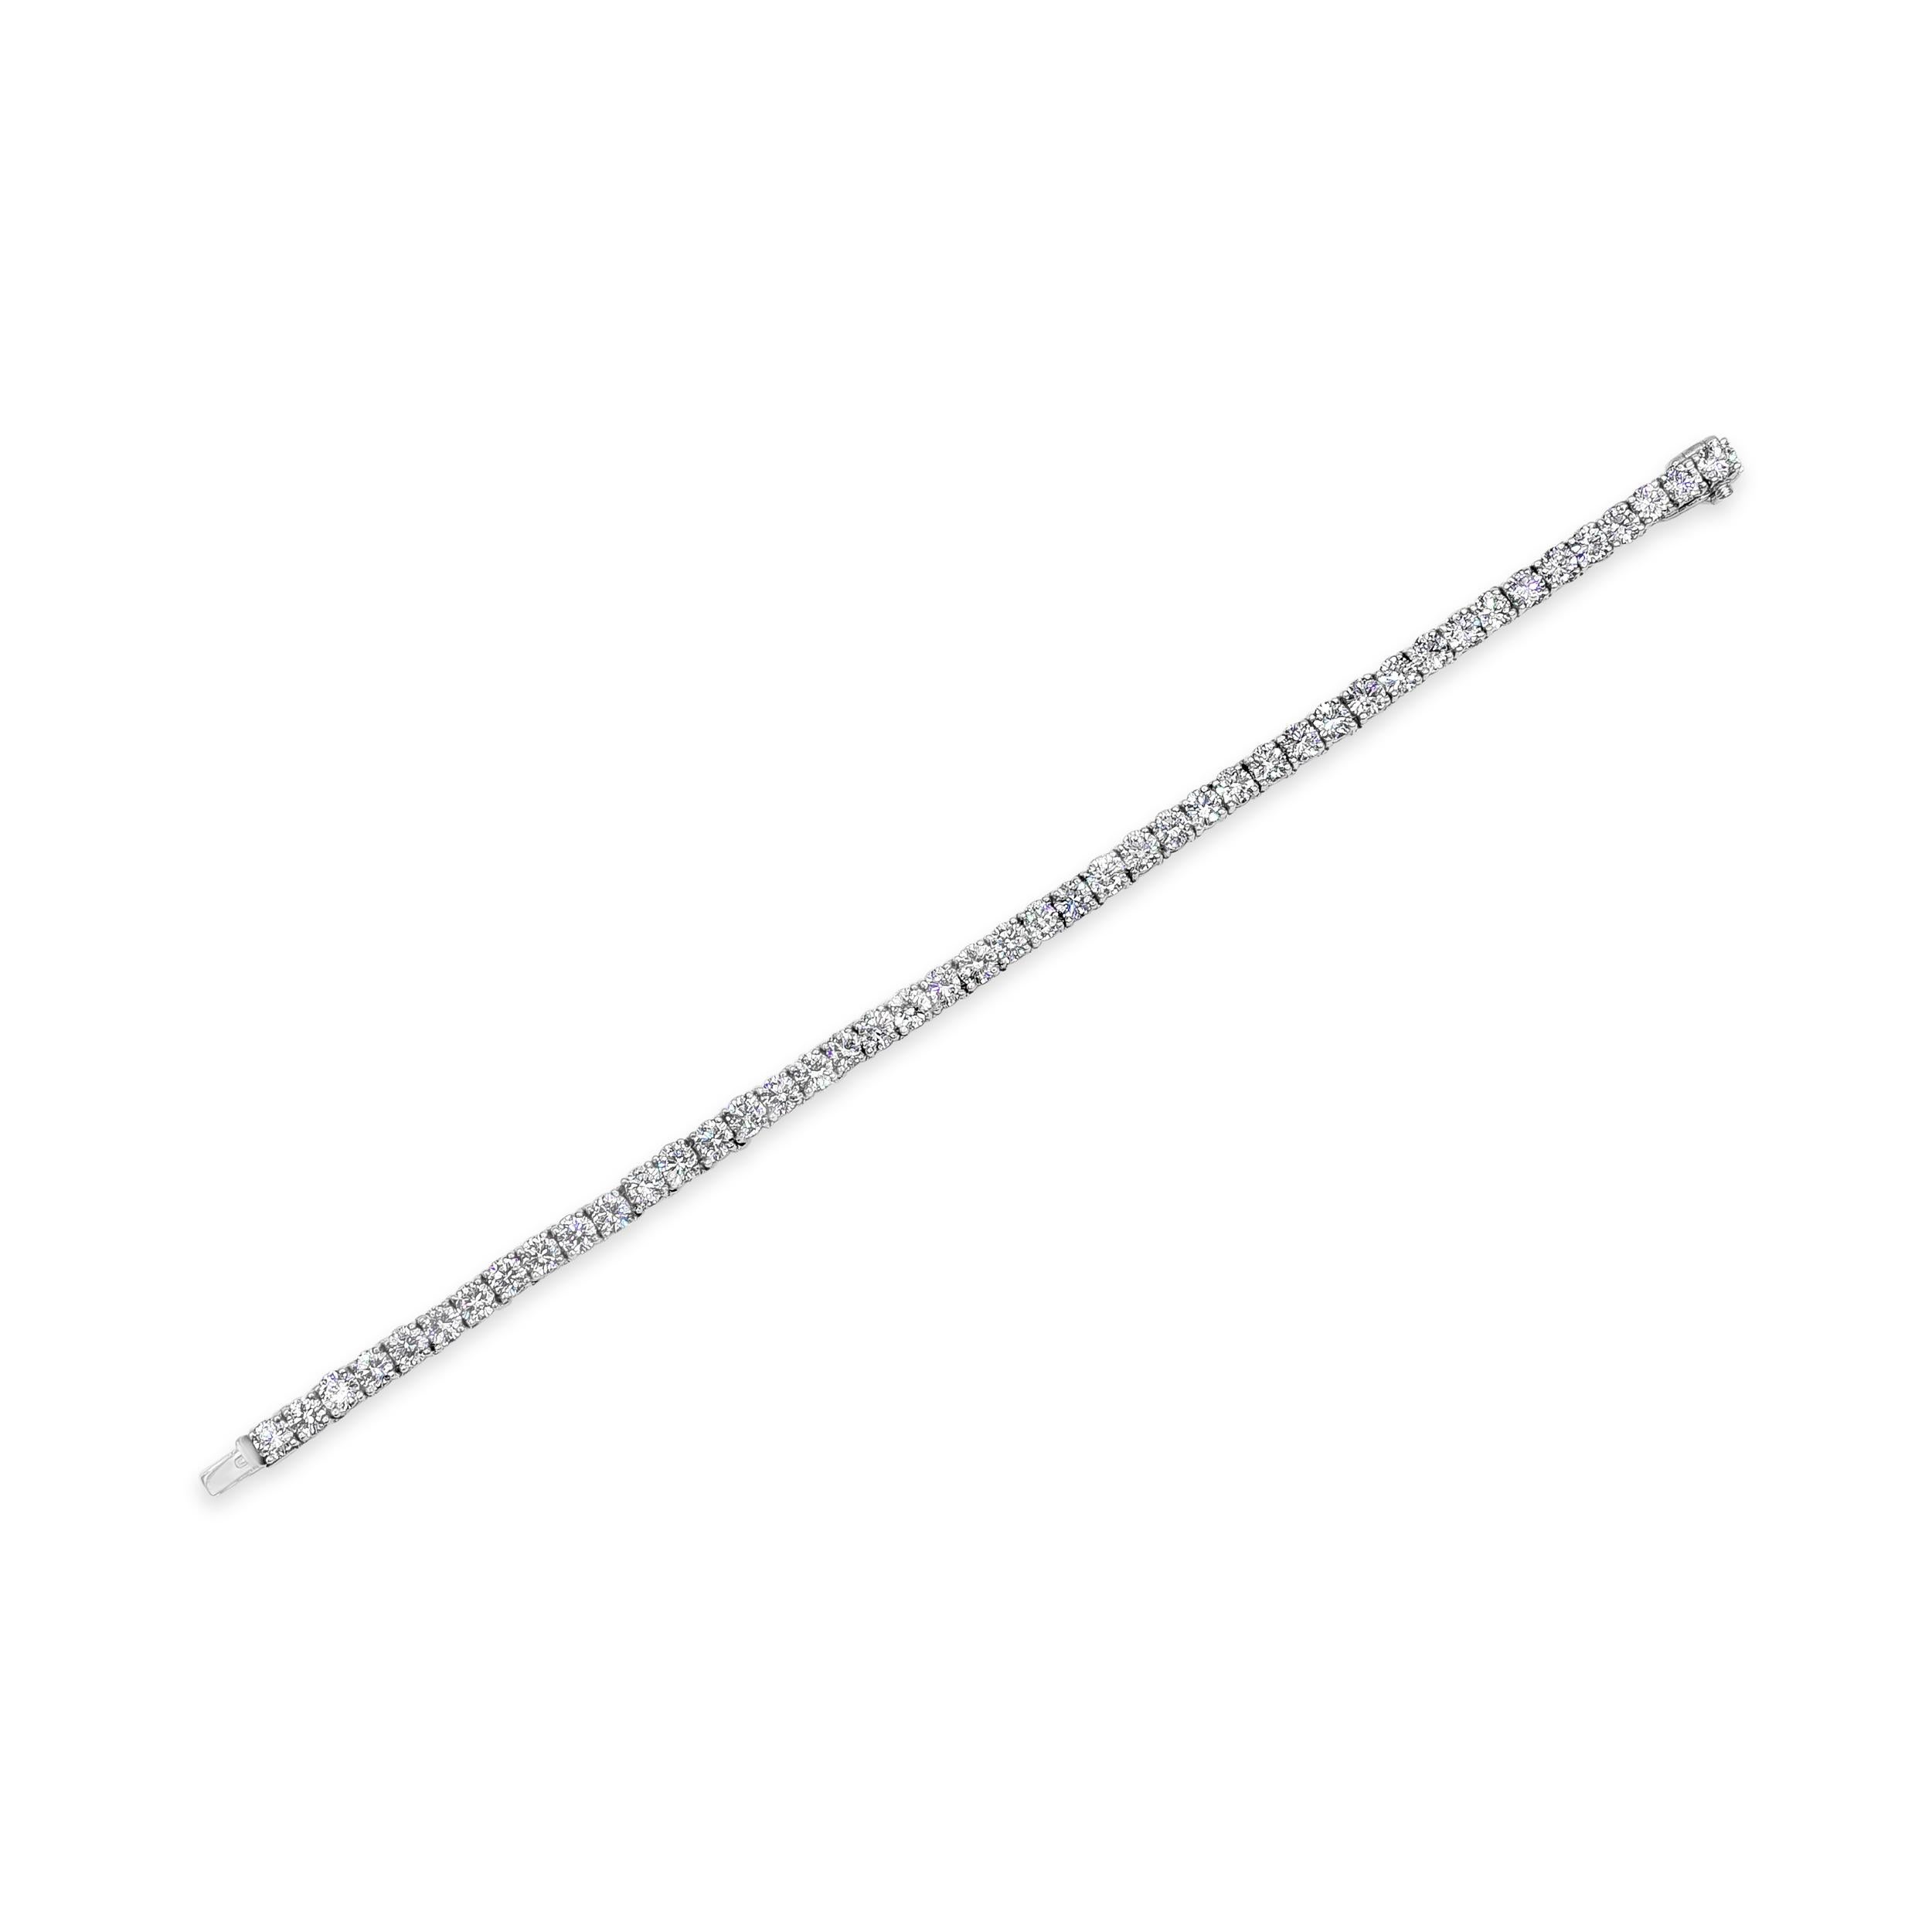 A classic tennis bracelet style showcasing a row of round brilliant diamonds weighing 10.85 carats total, F+ in Color and VS+ in Clarity. Made with Platinum 7 inches in Length. 

